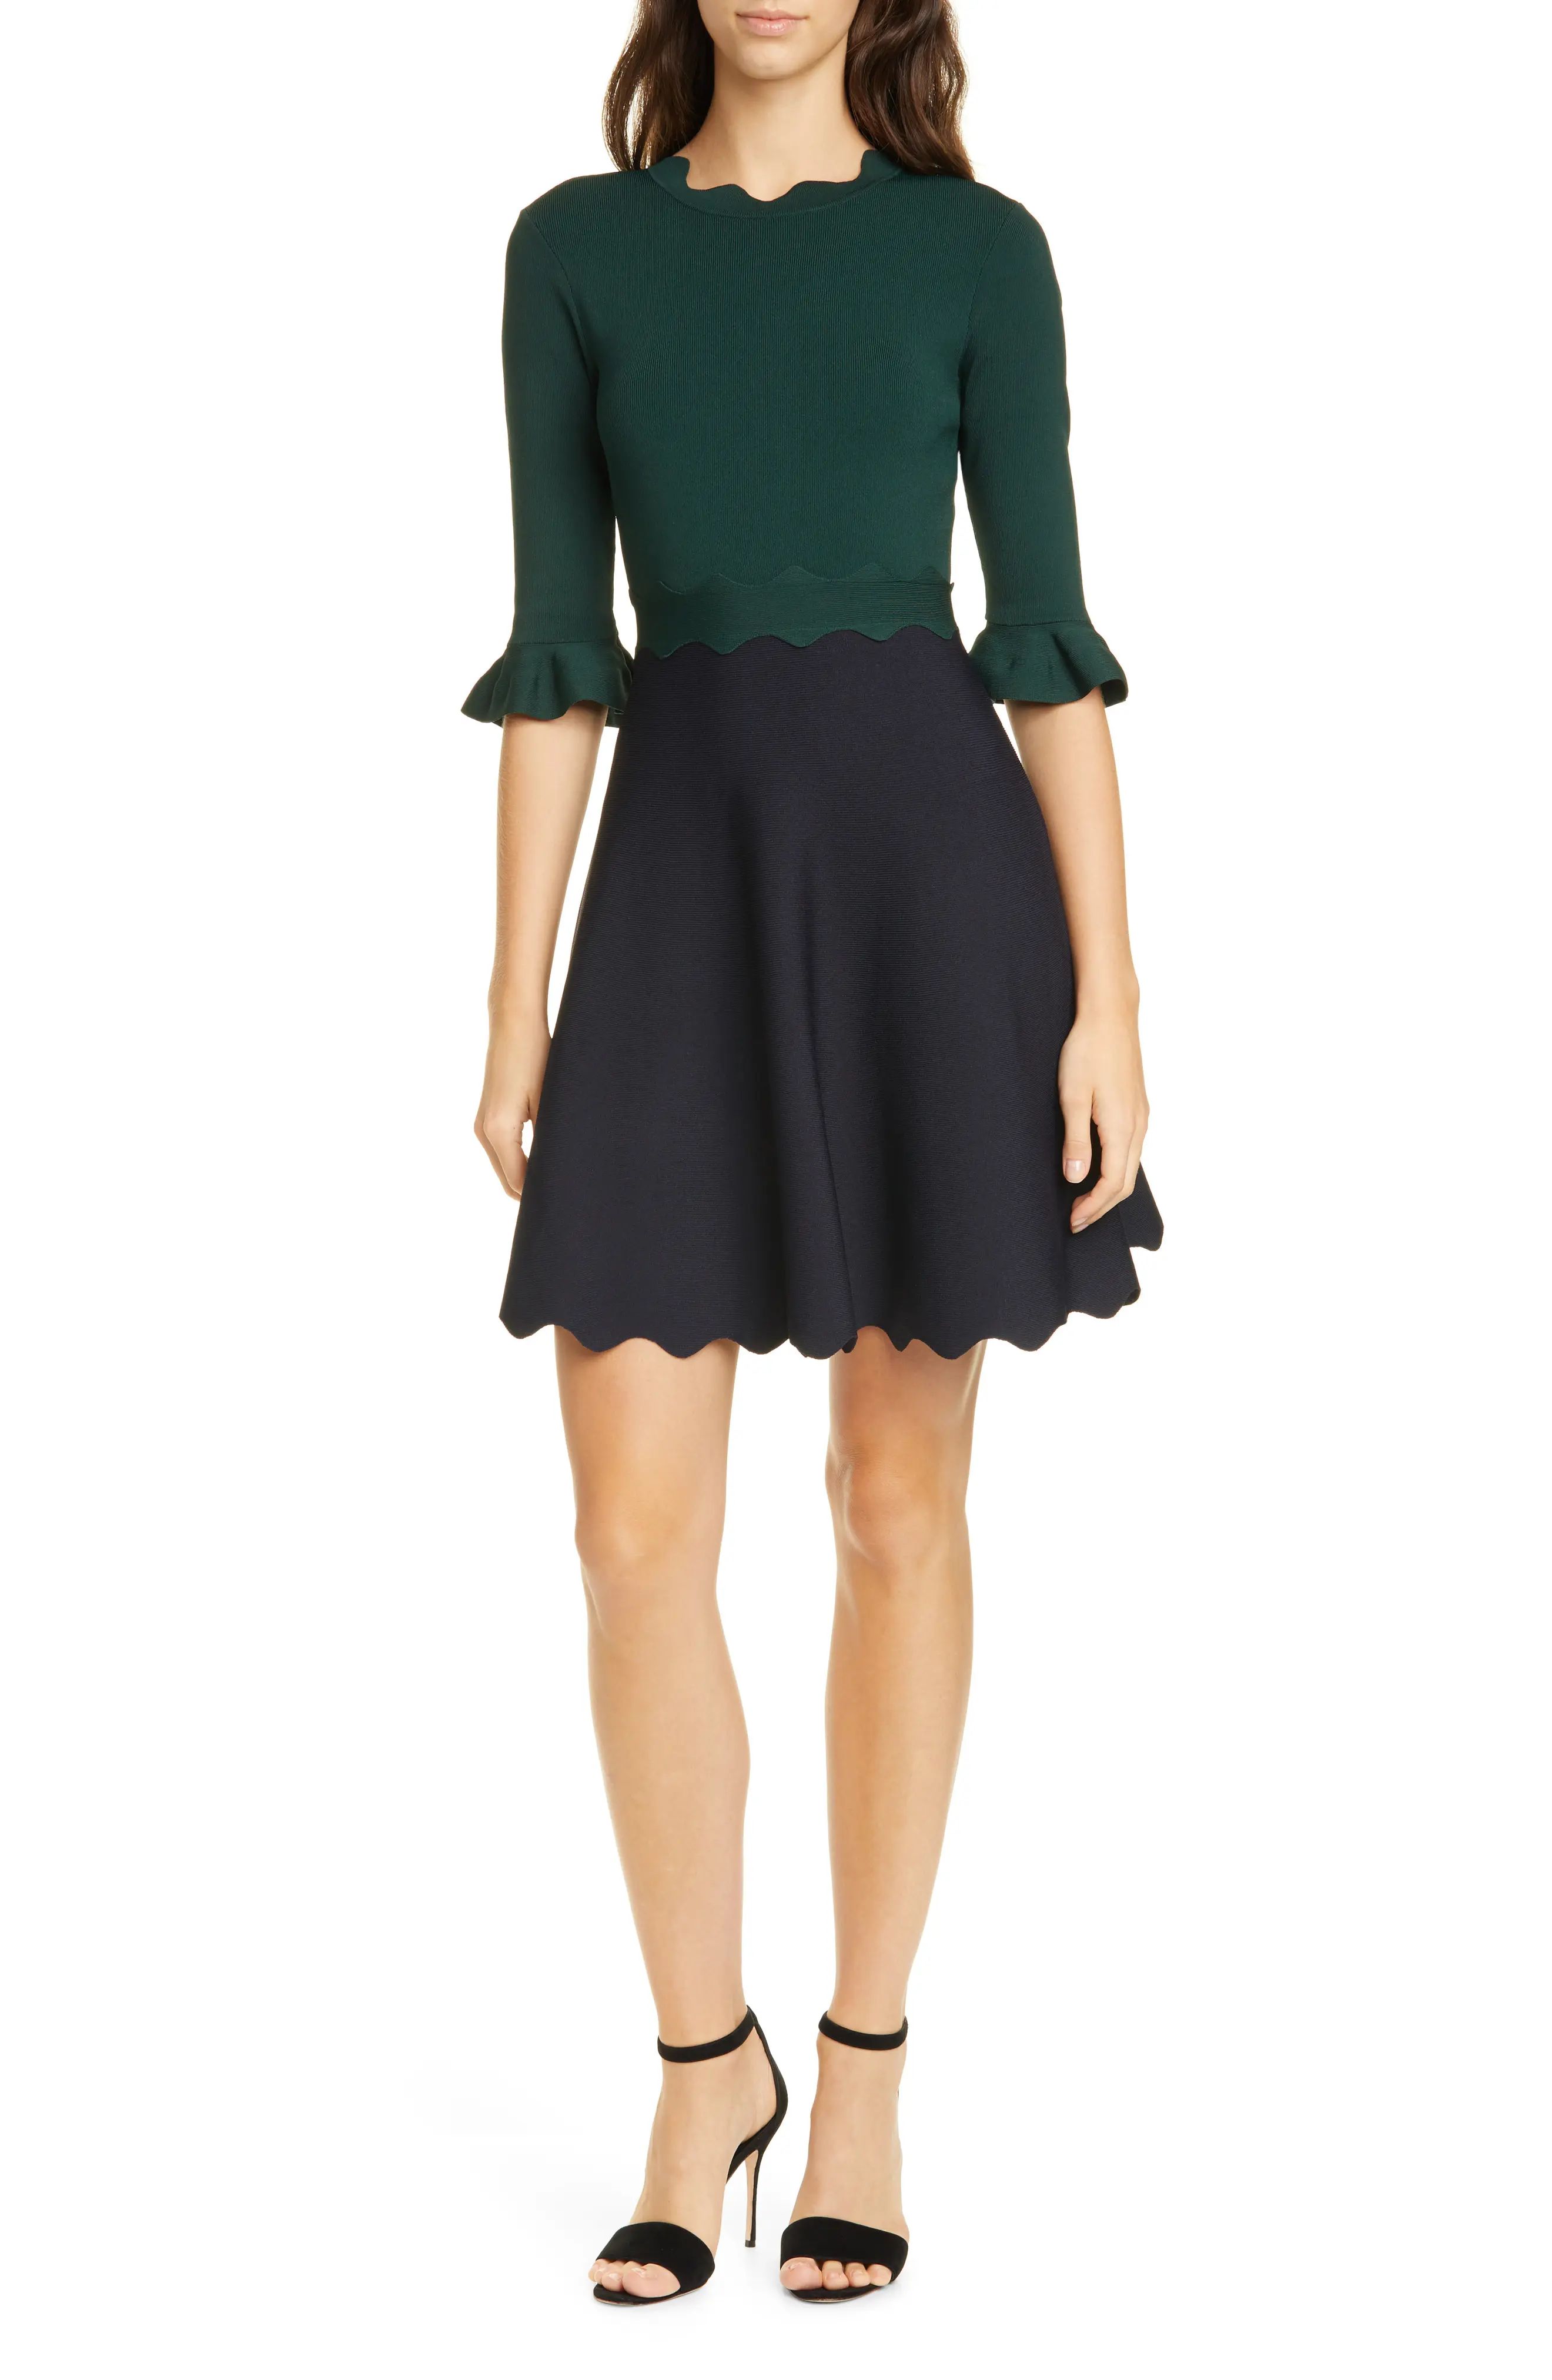 Women's Ted Baker London Lauron Fit & Flare Sweater Dress, Size 2 (fits like 4-6 US) - Blue/green | Nordstrom